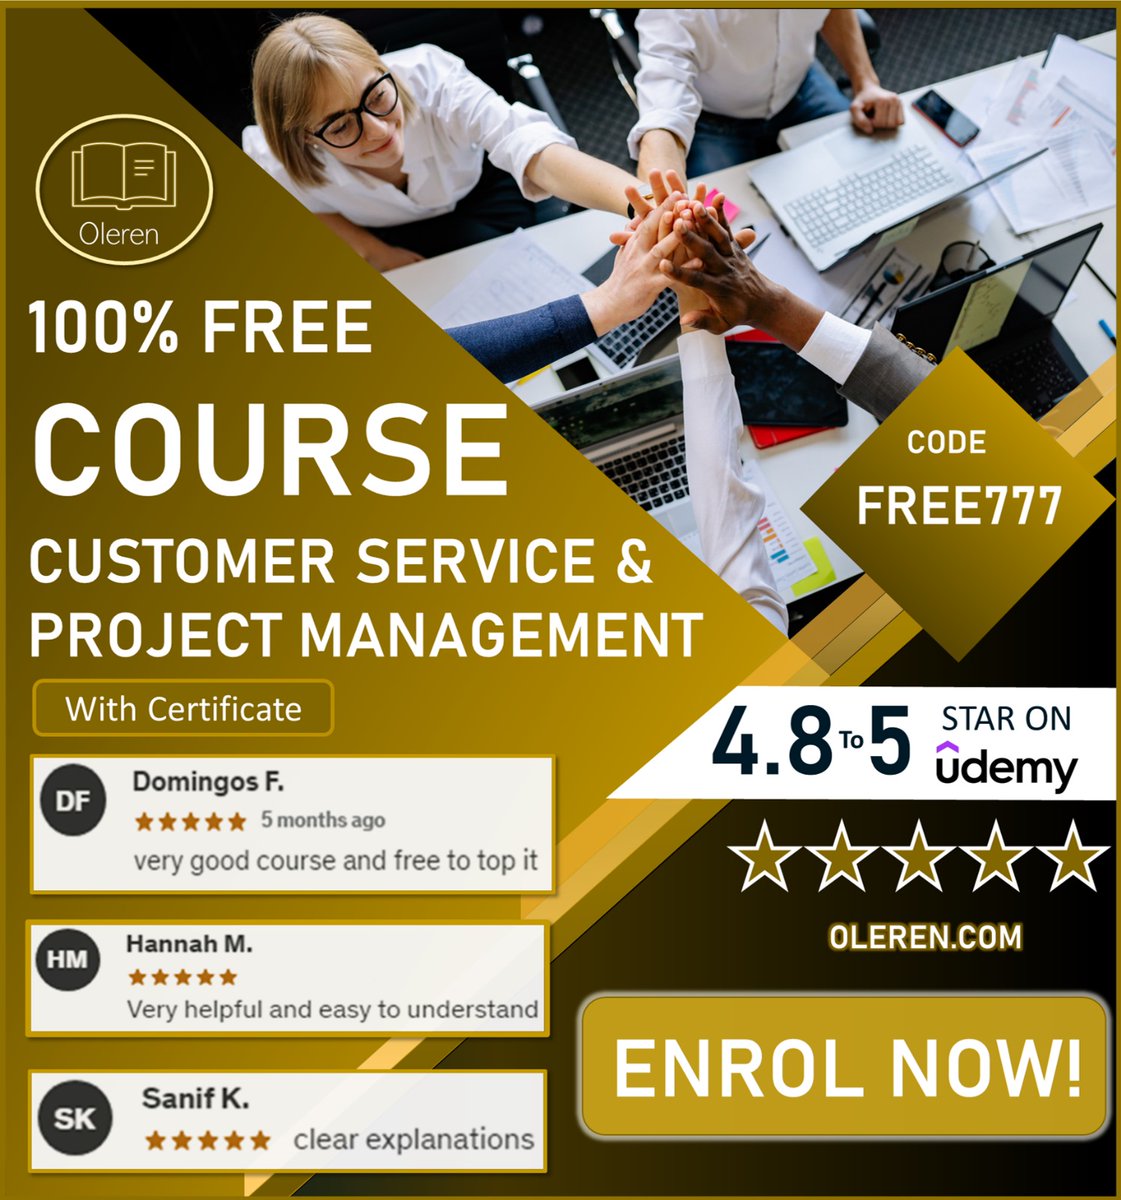 #Oleren in London is giving the opportunity to take courses 100% FREE - Customer Service & Project Management with Certificates of Completion. Click the link to auto add courses to cart with 100% discount code FREE777 -Link Direct to Apply discount oleren.com/coupons/free777 1/2